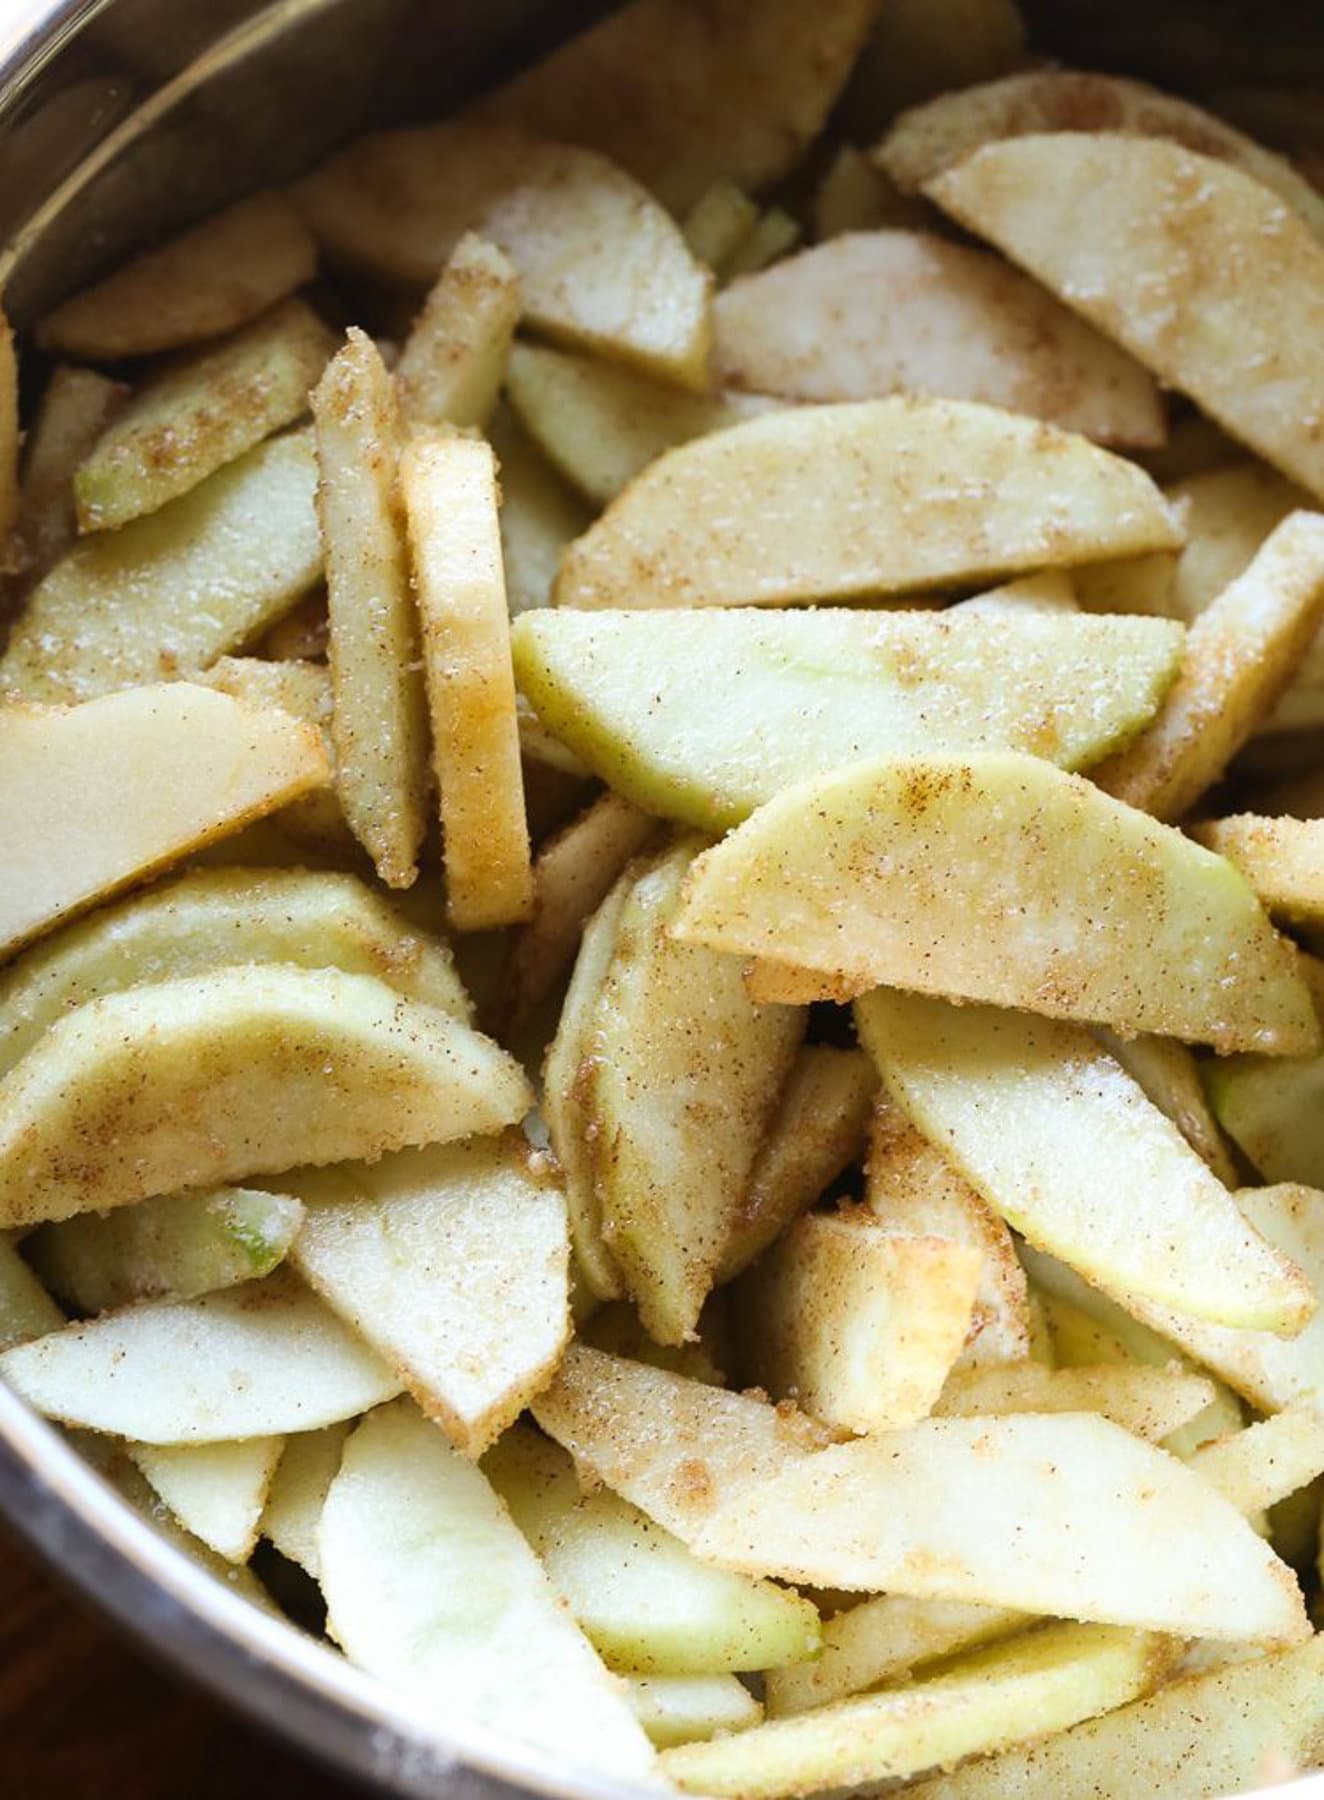 Apples diced and covered with cinnamon 